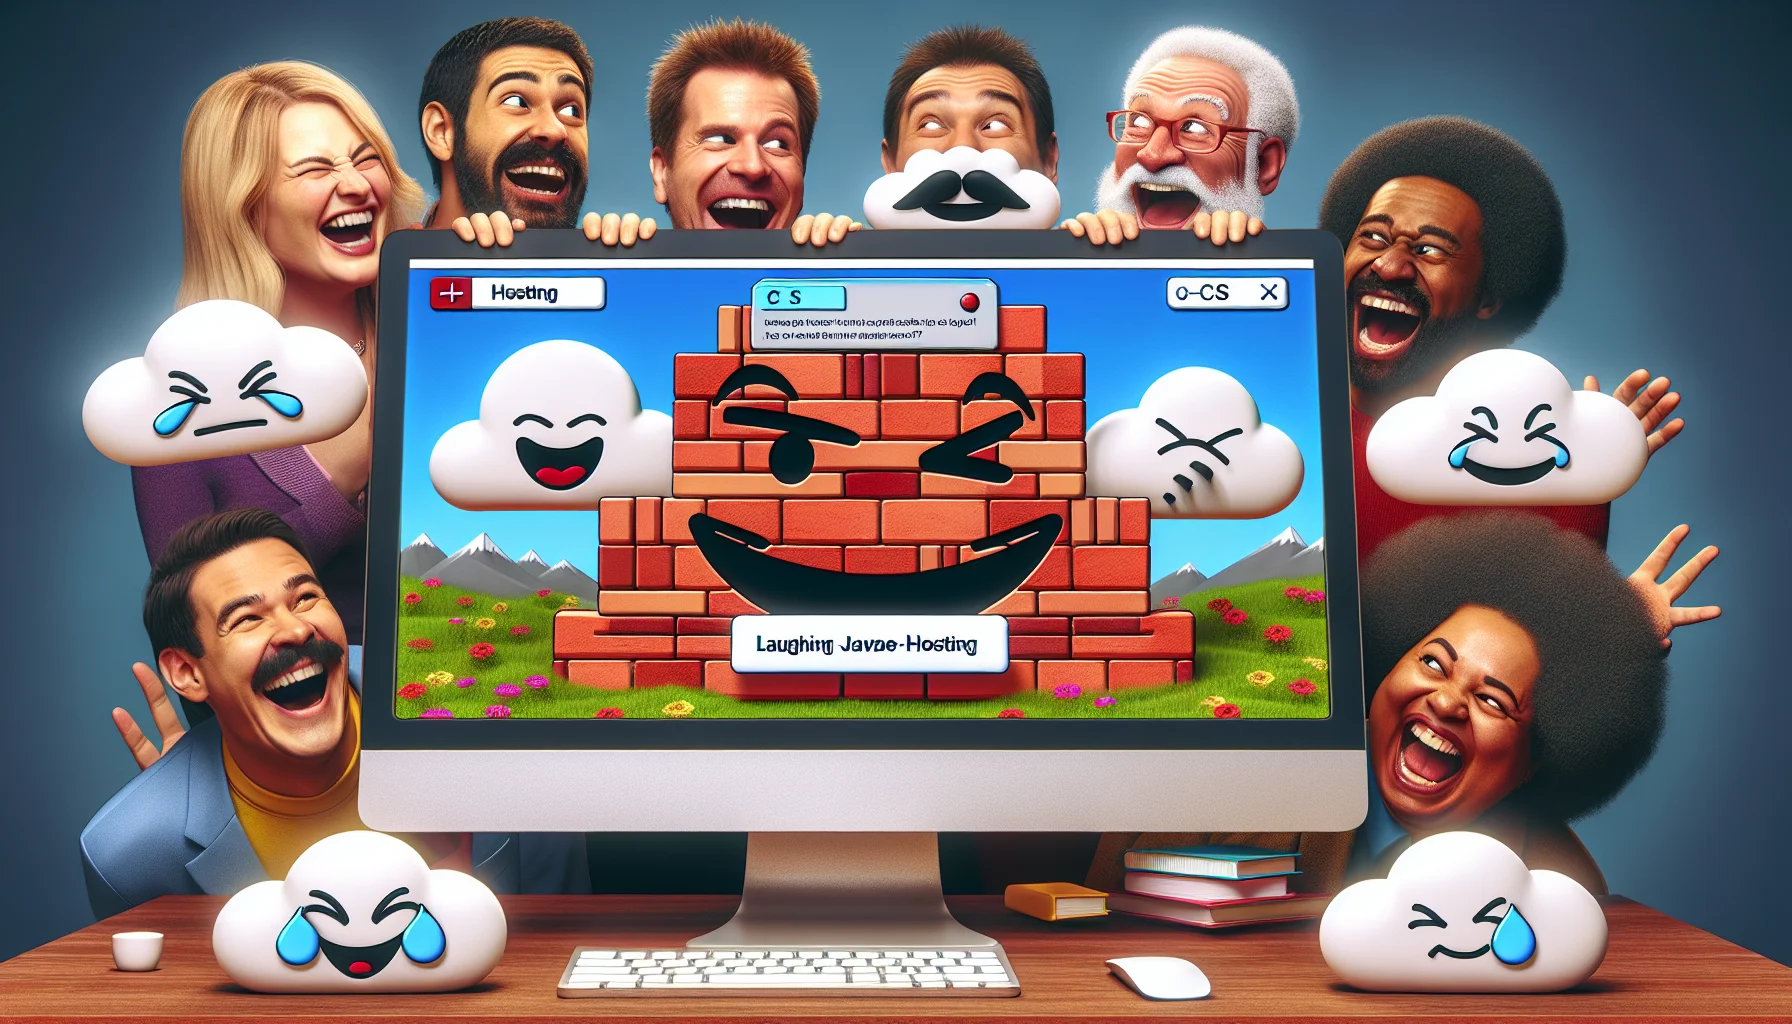 An amusing and enticing scene highlighting a fictional interactive web creation tool with a logo featuring iconic red bricks akin to adobe masonry. The interface of the digital application has playful design elements like winking CSS tags and laughing Javascript nuggets. Additionally, there are exaggerated 'hosting' buttons that are shaped like fluffy clouds which, when pressed, create palatial sky castles, suggesting a robust web hosting service. Behind the computer screen, a diverse group of individuals ranging from a Caucasian woman, a Black man, a Middle-Eastern woman, and a South Asian man are depicted laughing and enjoying the quirks of the tool.